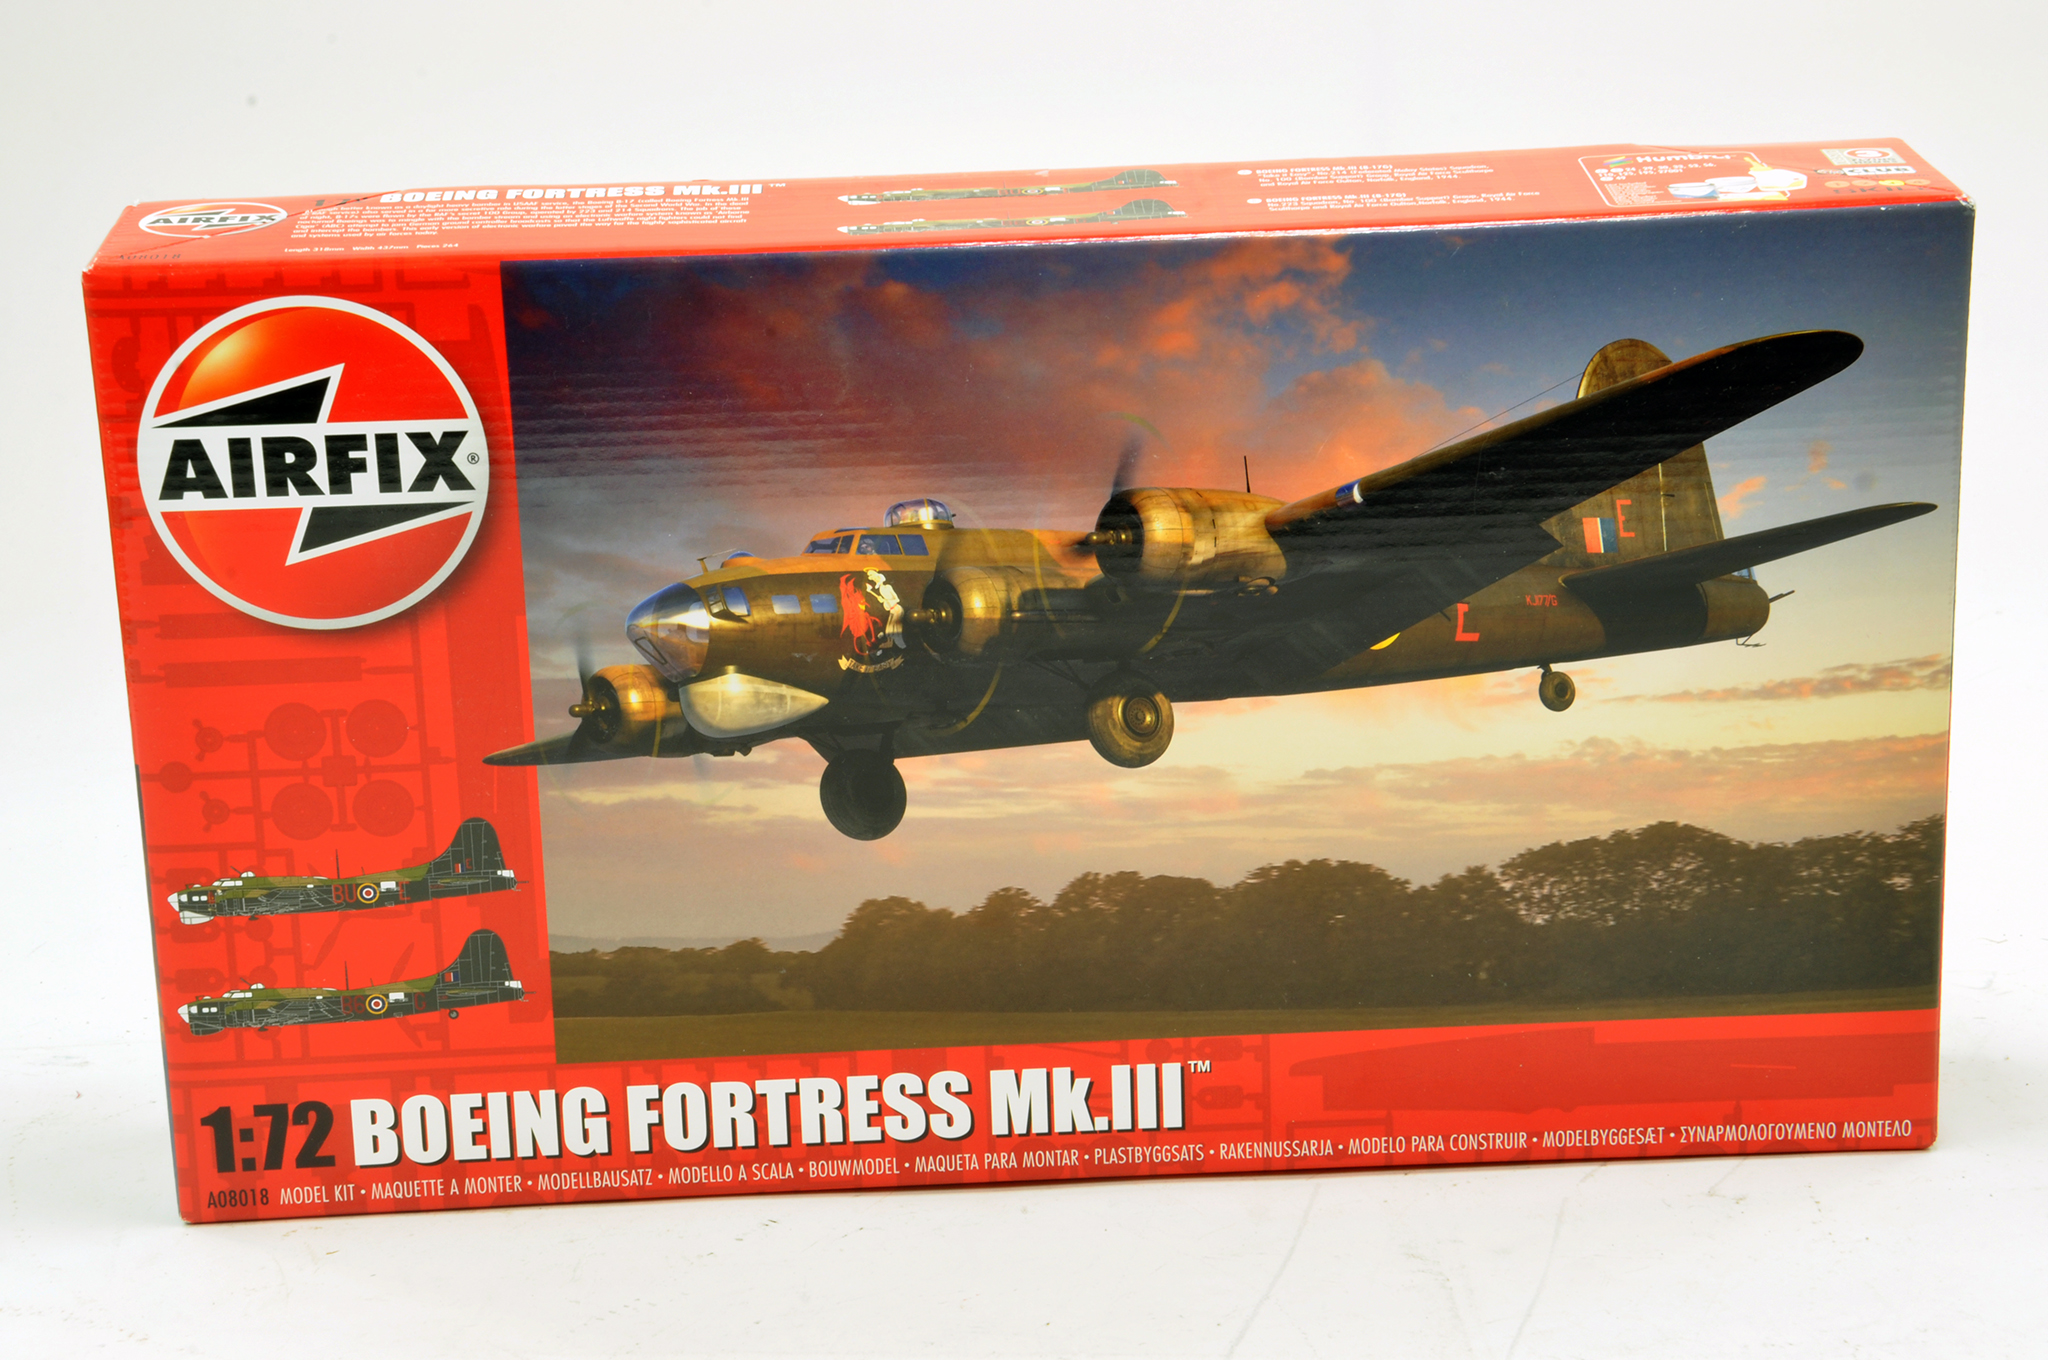 Airfix 1/72 Plastic Model Kit comprising Boeing Fortress MKIII. Complete.